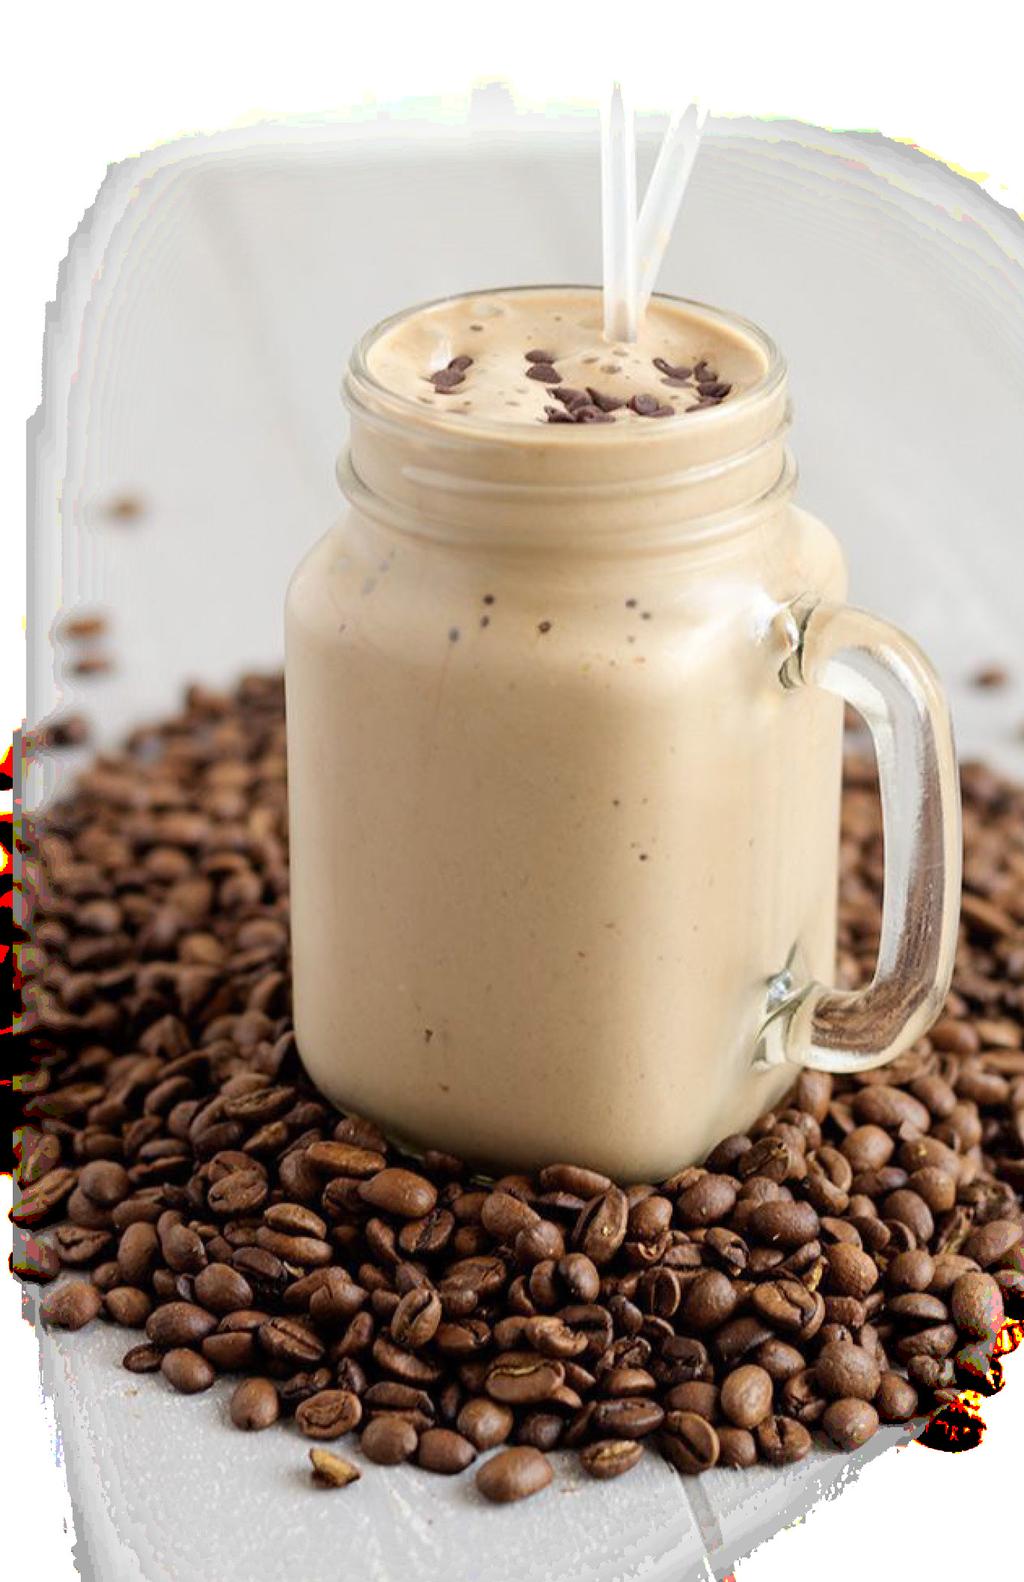 UltraShake TM Recipes Just add 8oz. of cold water (or preferred milk) and shake or blend. Simple! Get creative or try some of our delicious recipes below.